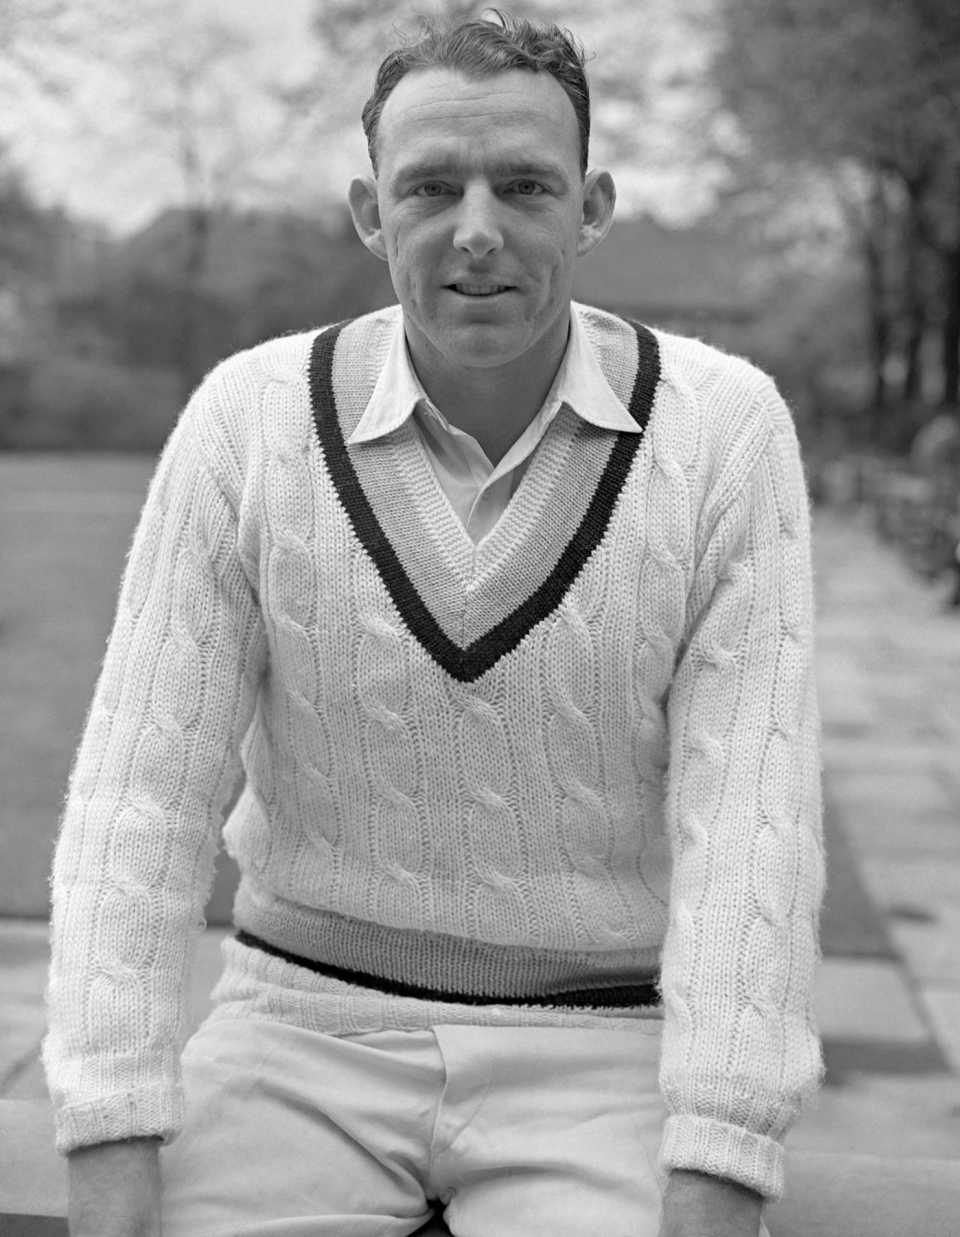 Bob Appleyard poses for a photo during Yorkshire's match against the MCC, MCC v Yorkshire, 2nd day, May 2, 1955